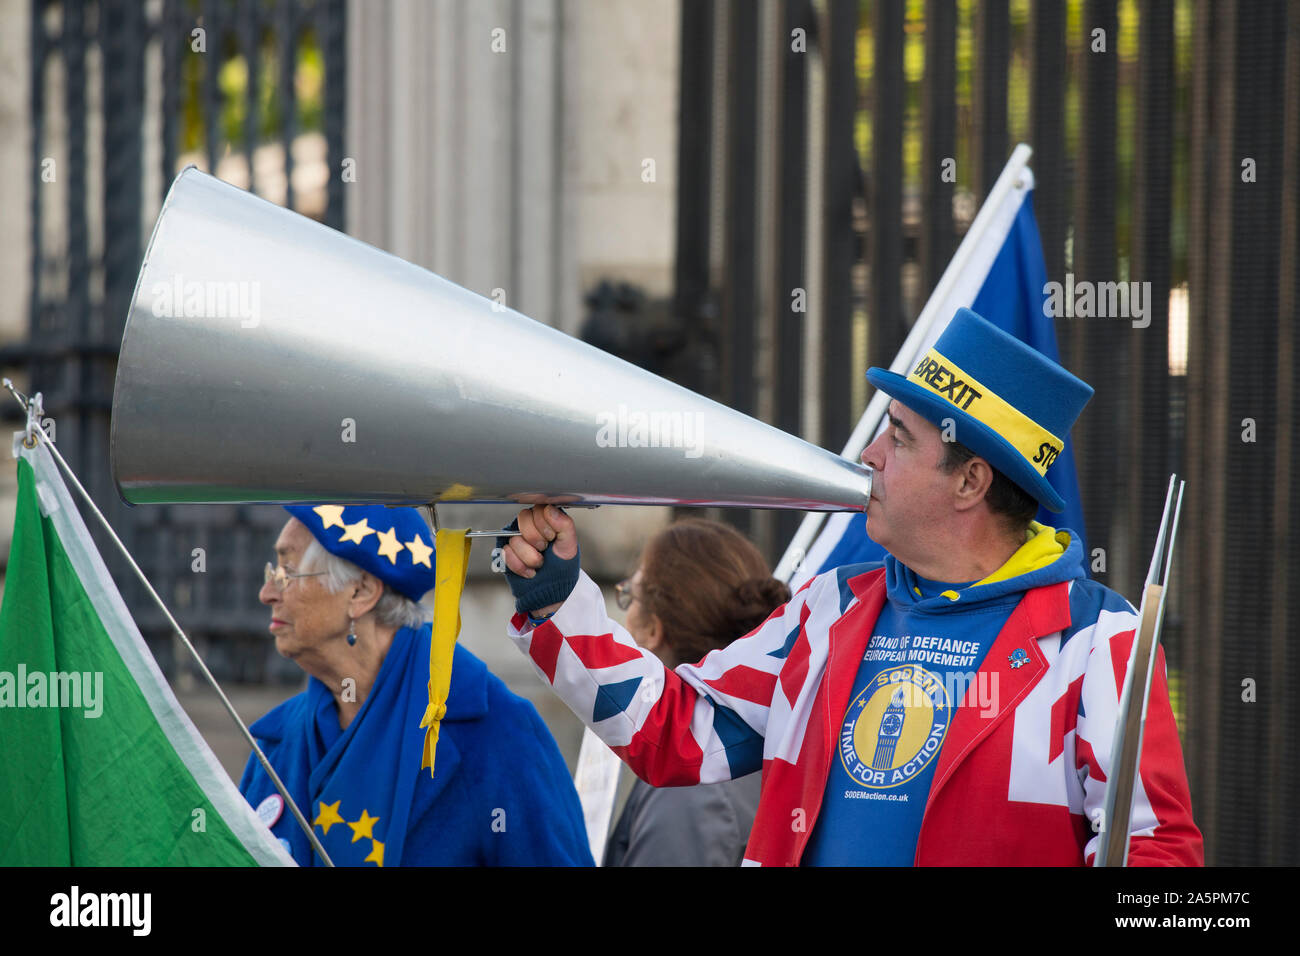 Westminster, London, UK. 22nd October 2019. Stop Brexit demonstrators in Parliament Square await the arrival of MPs for daily business. Anti-Brexit SODEM activist Steve Bray with trademark megaphone. Credit: Malcolm Park/Alamy Live News. Stock Photo